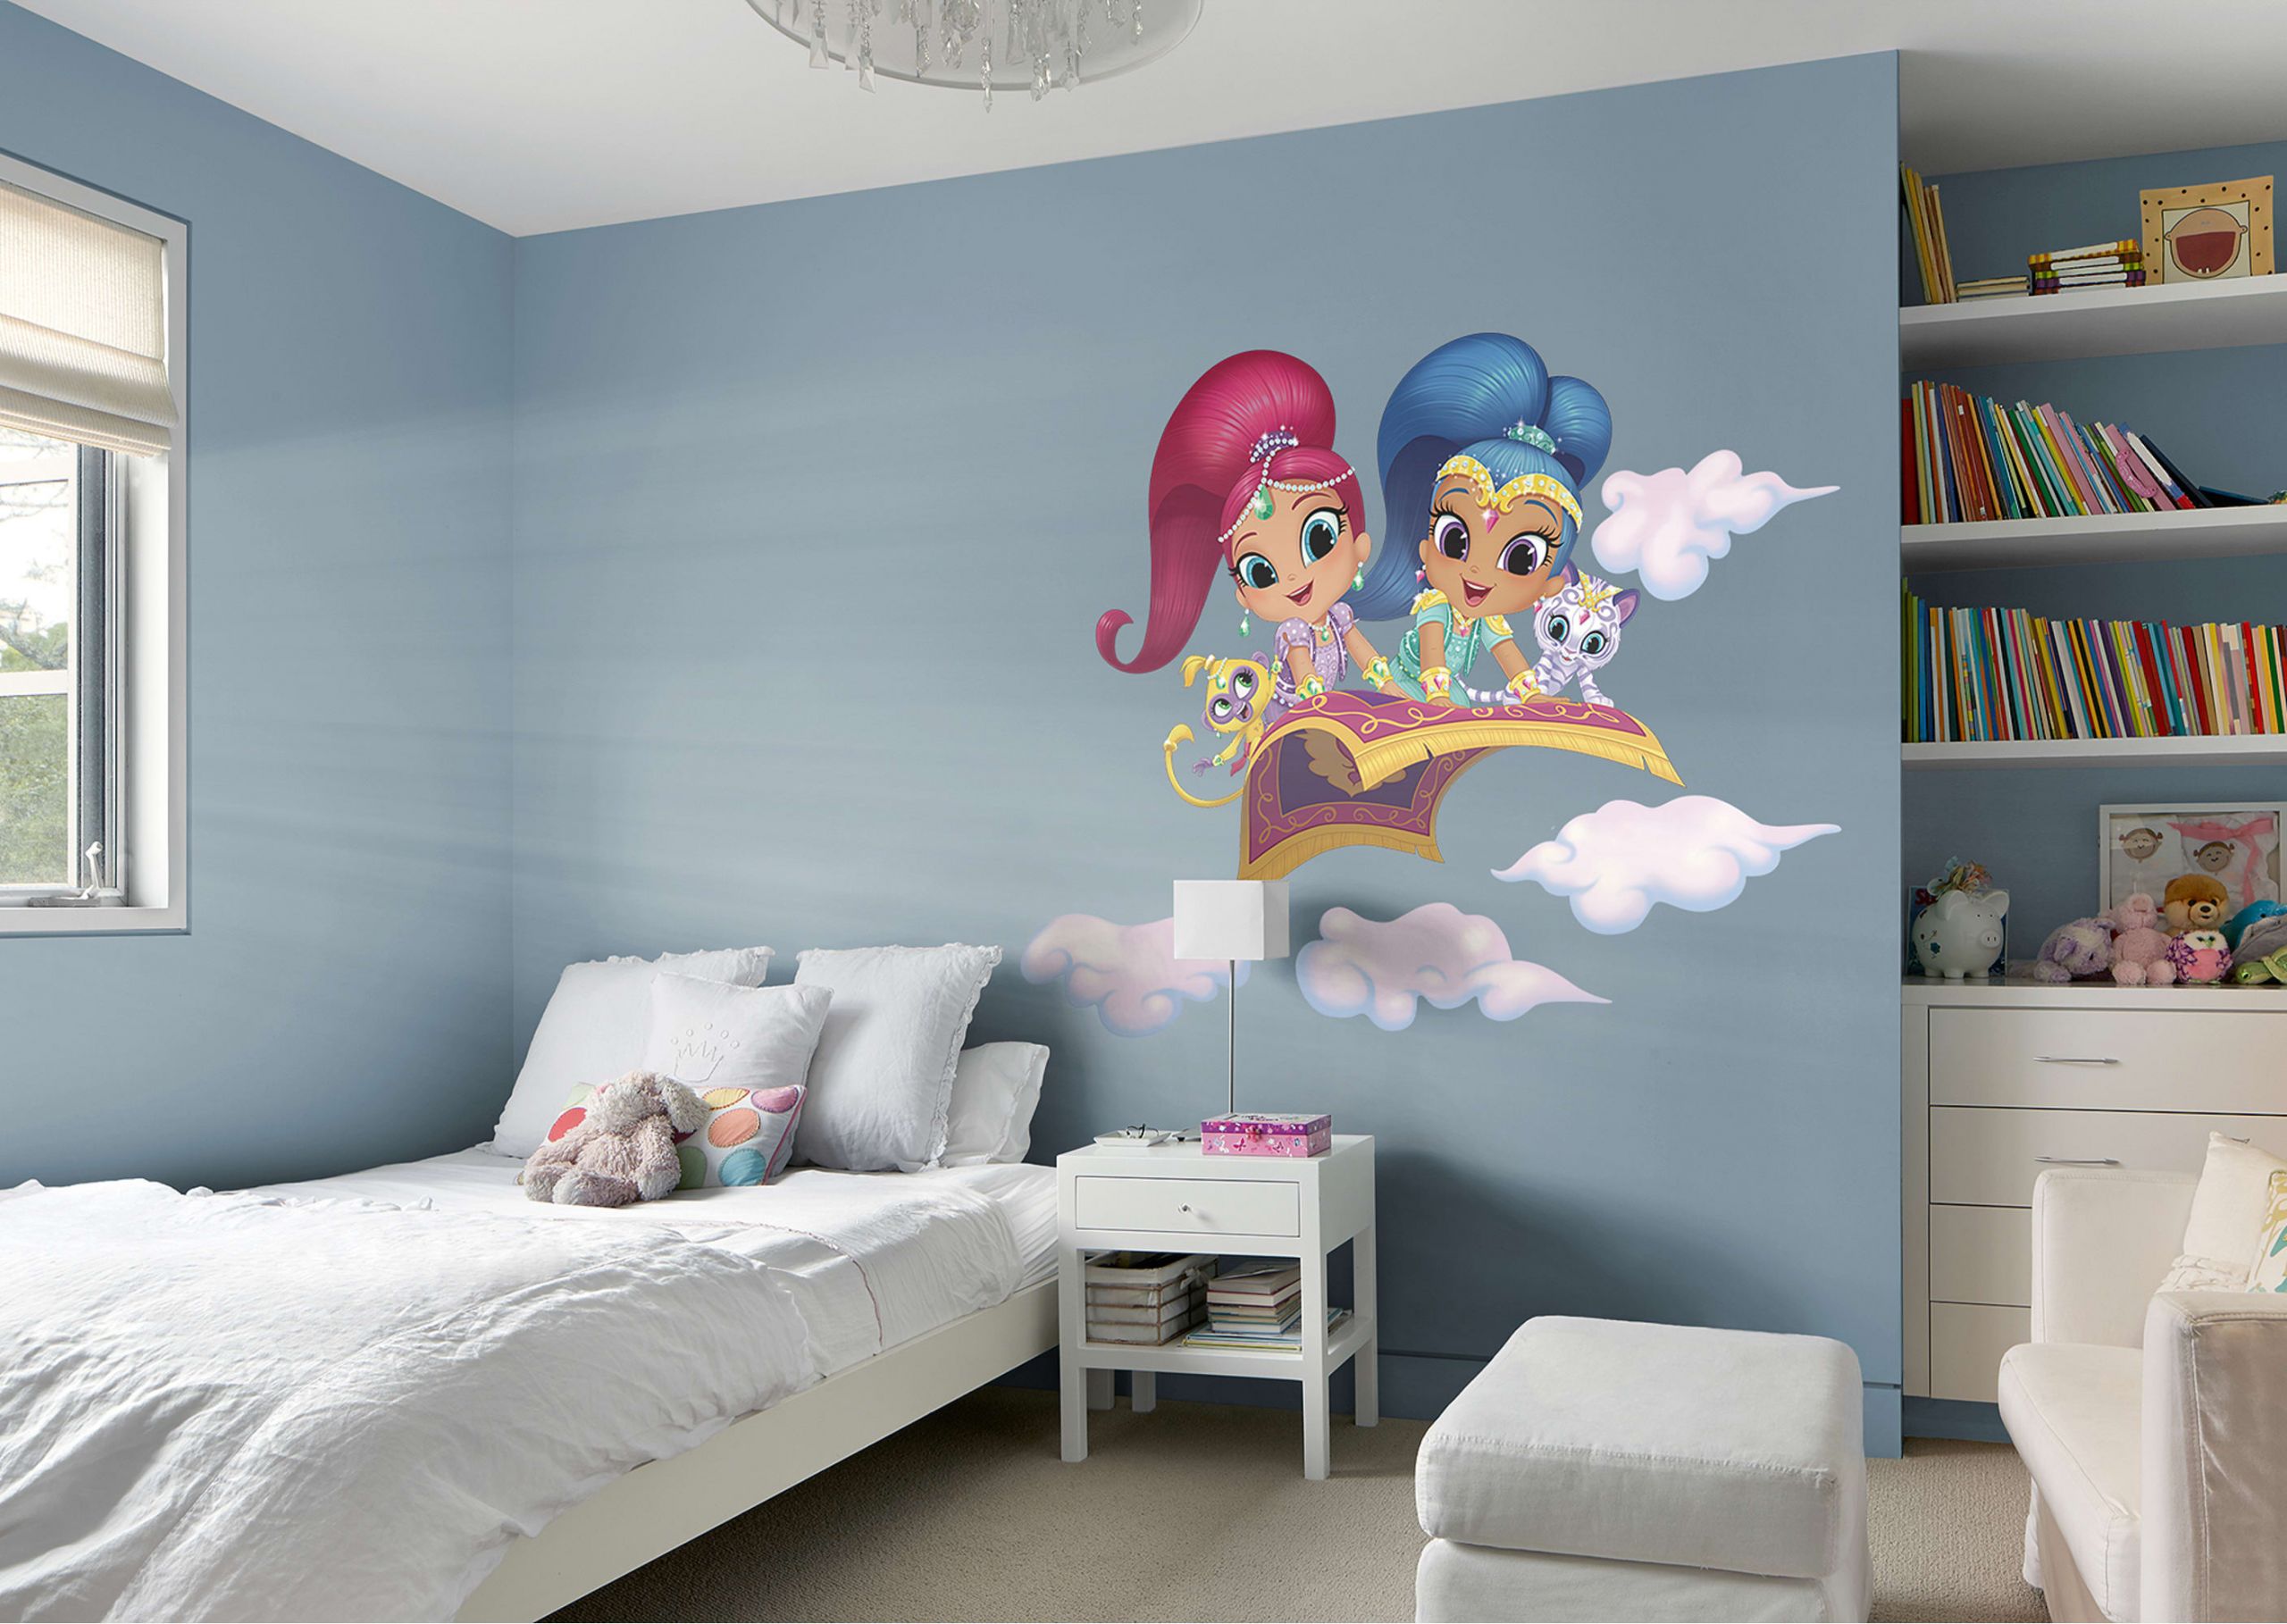 Shimmer And Shine Bedroom Decor
 Shimmer and Shine Wall Decal